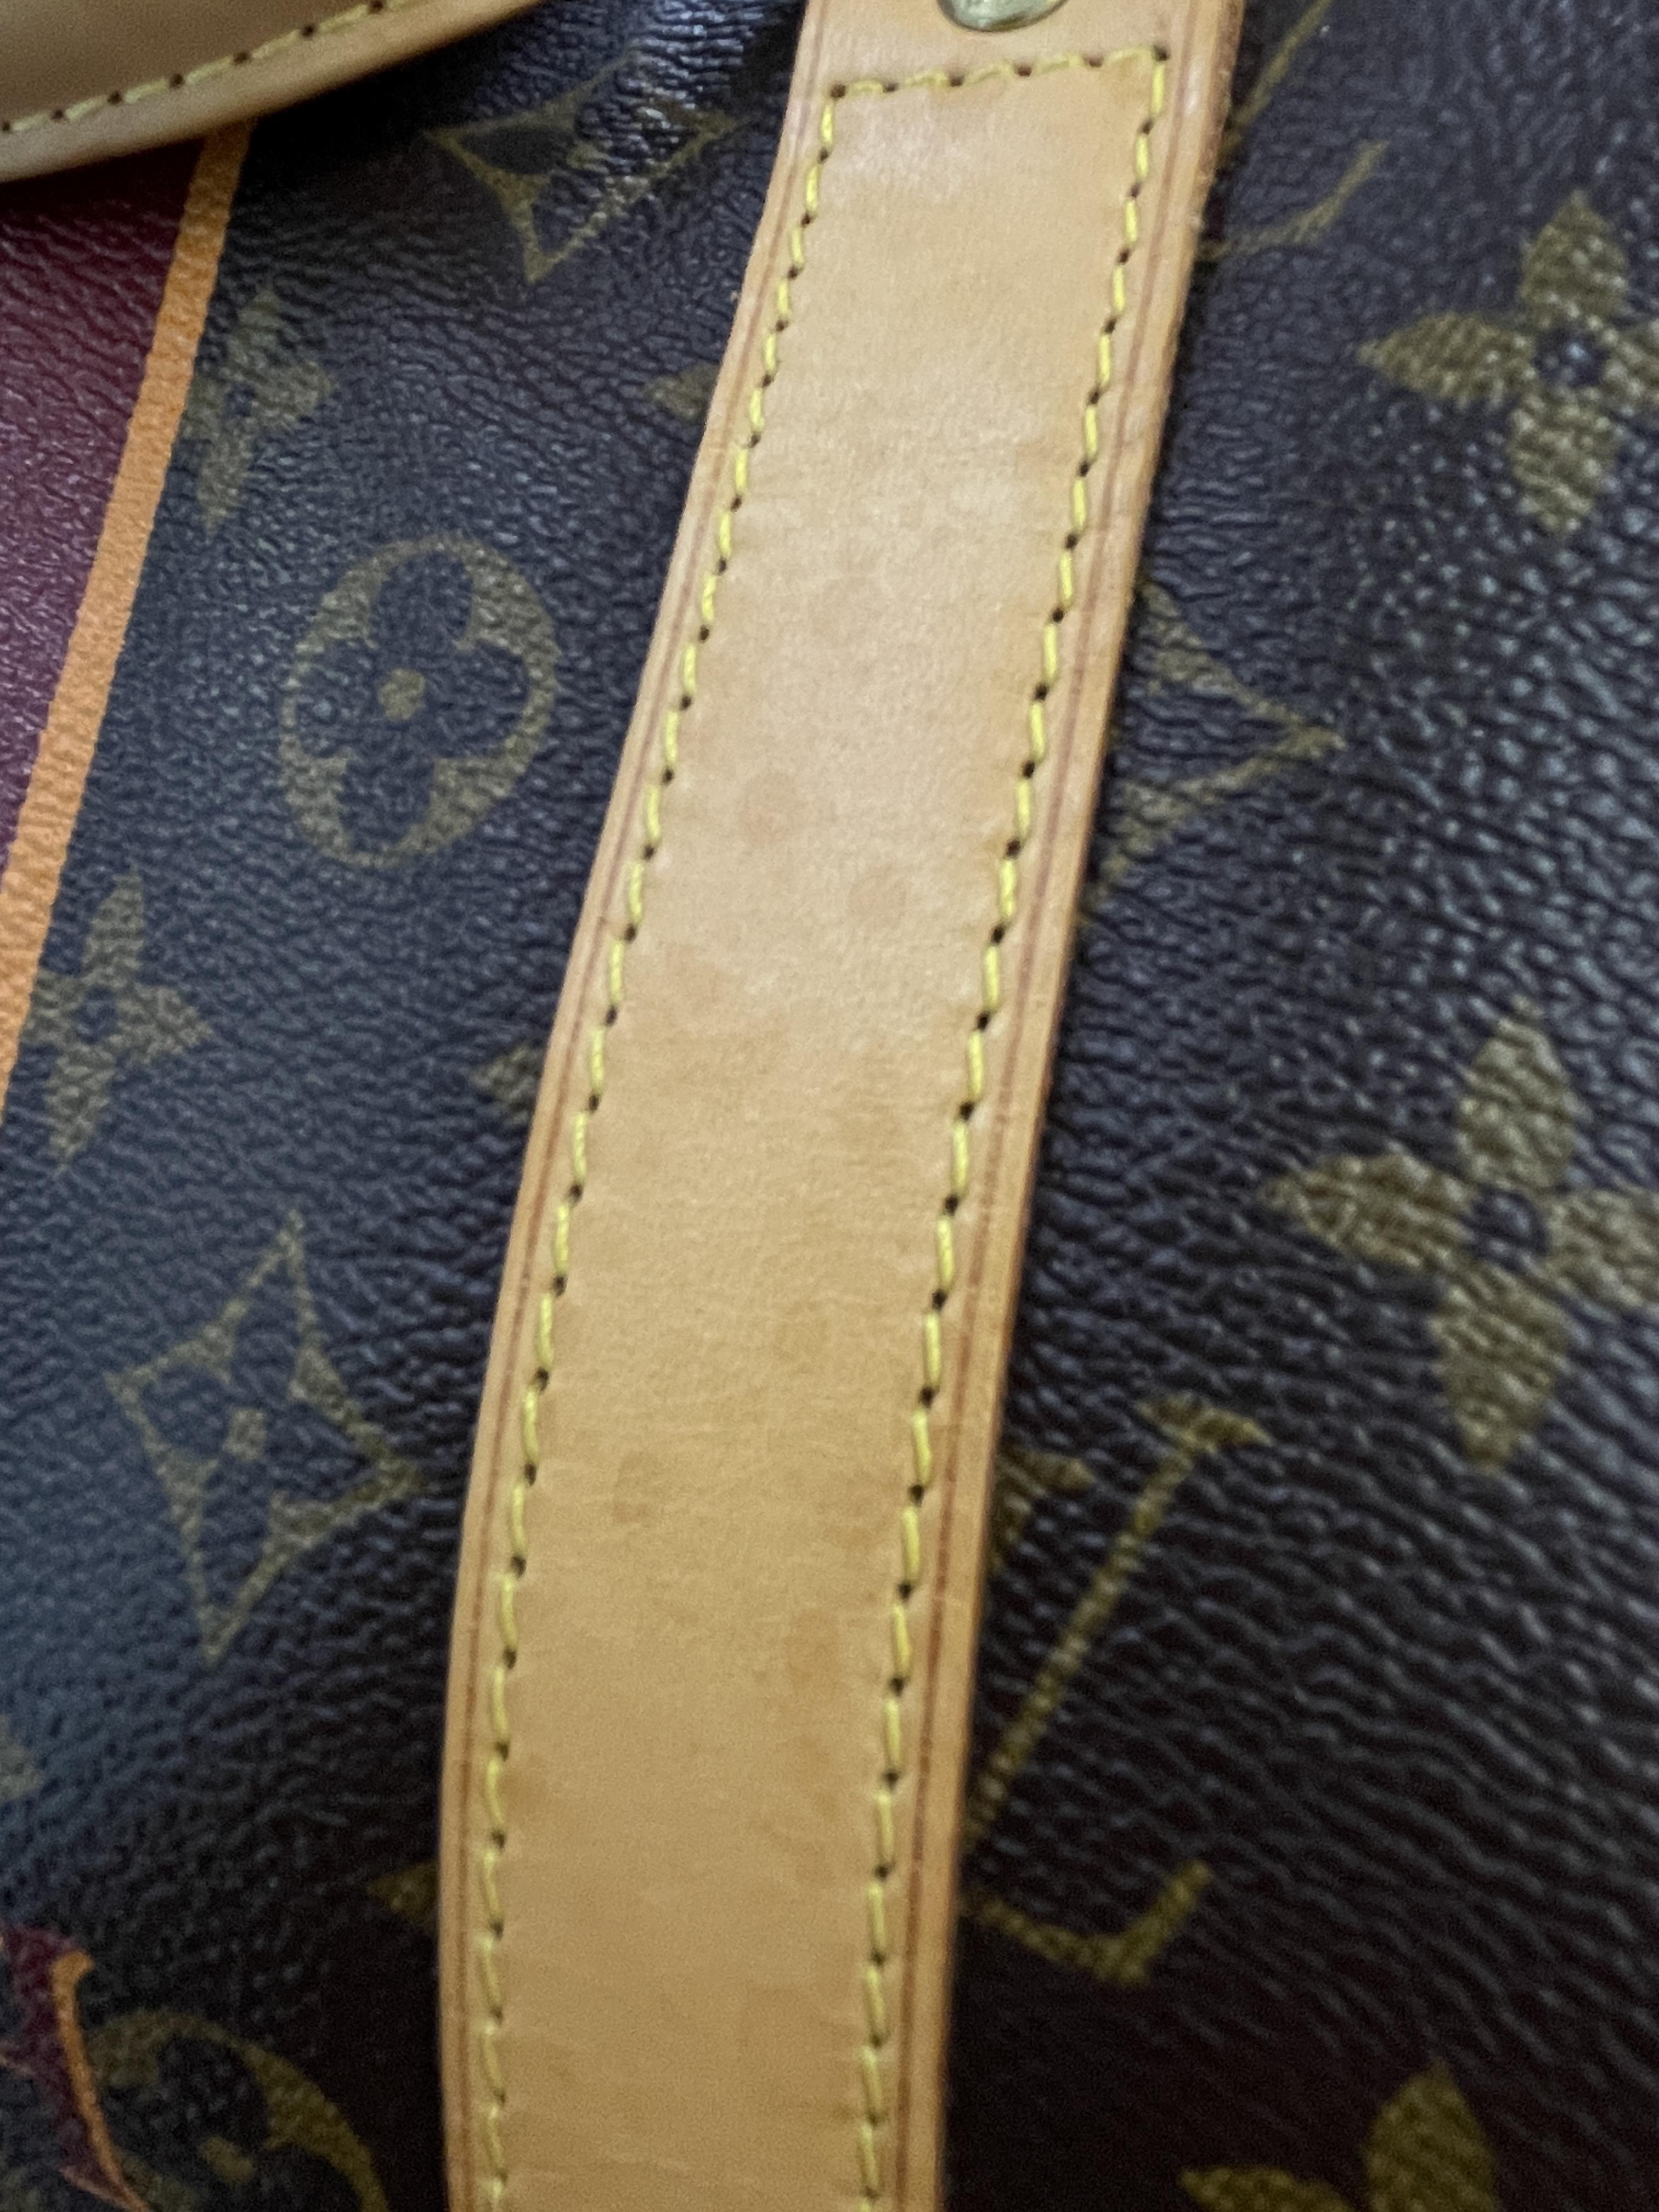 LOUIS VUITTON KEEPALL BANDOULIERE - Image 9 of 10